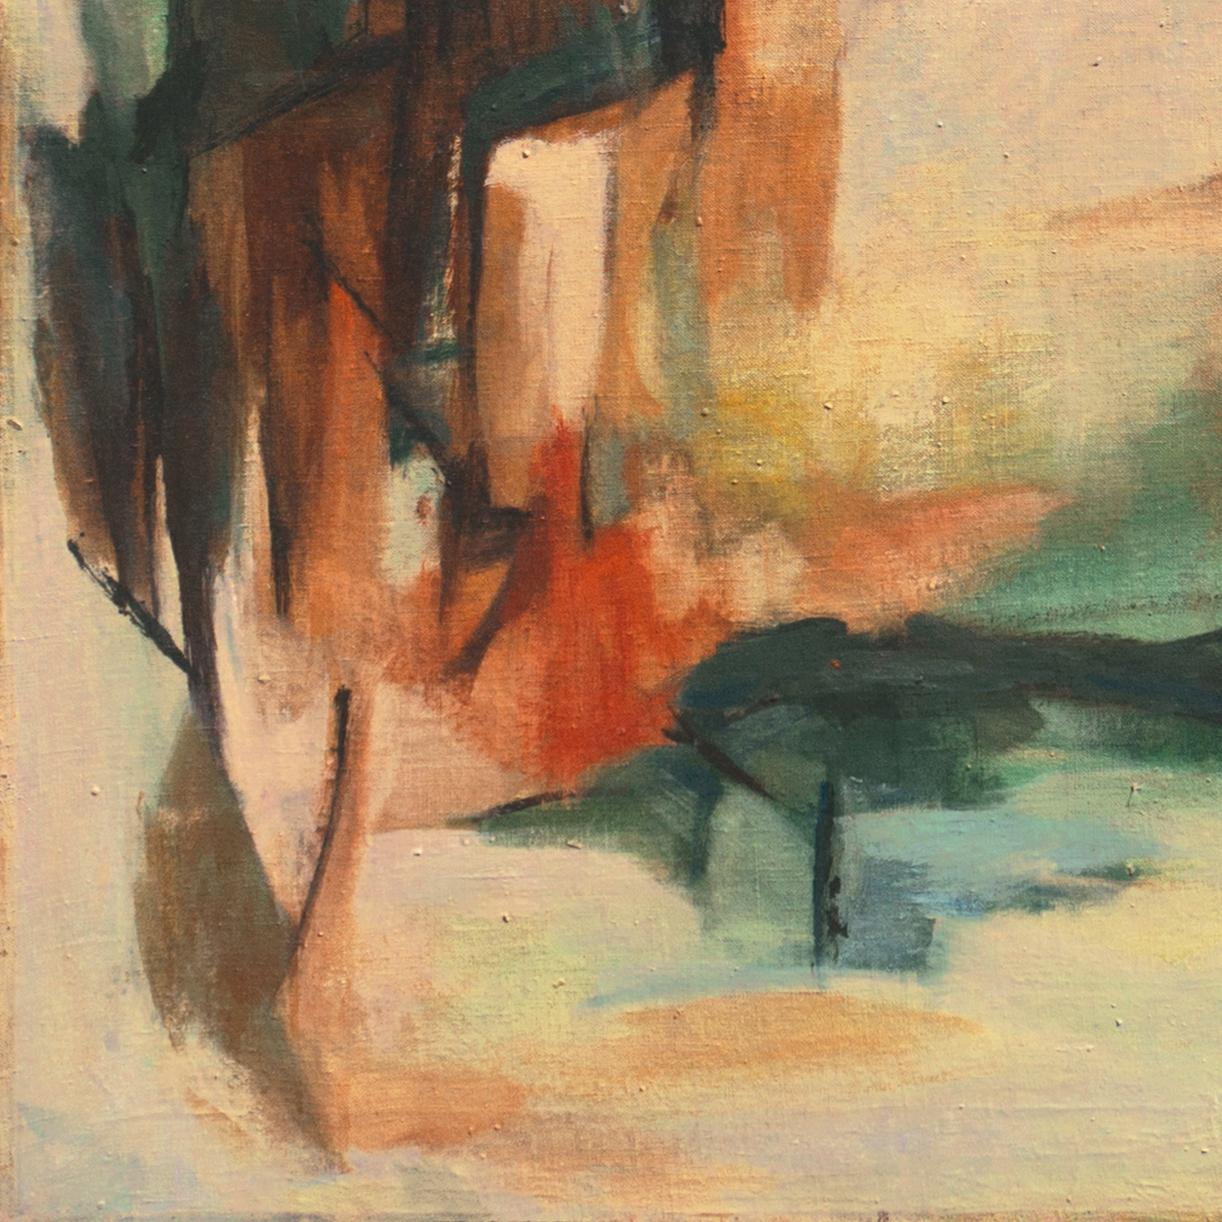 A substantial, mid-century oil abstract comprising contiguous and overlaid areas of jade, terracotta and forest-green laid on a lilac and parchment background. Signed lower right, 'E. Hammerschmidt' (American,20th century) and painted circa 1950.